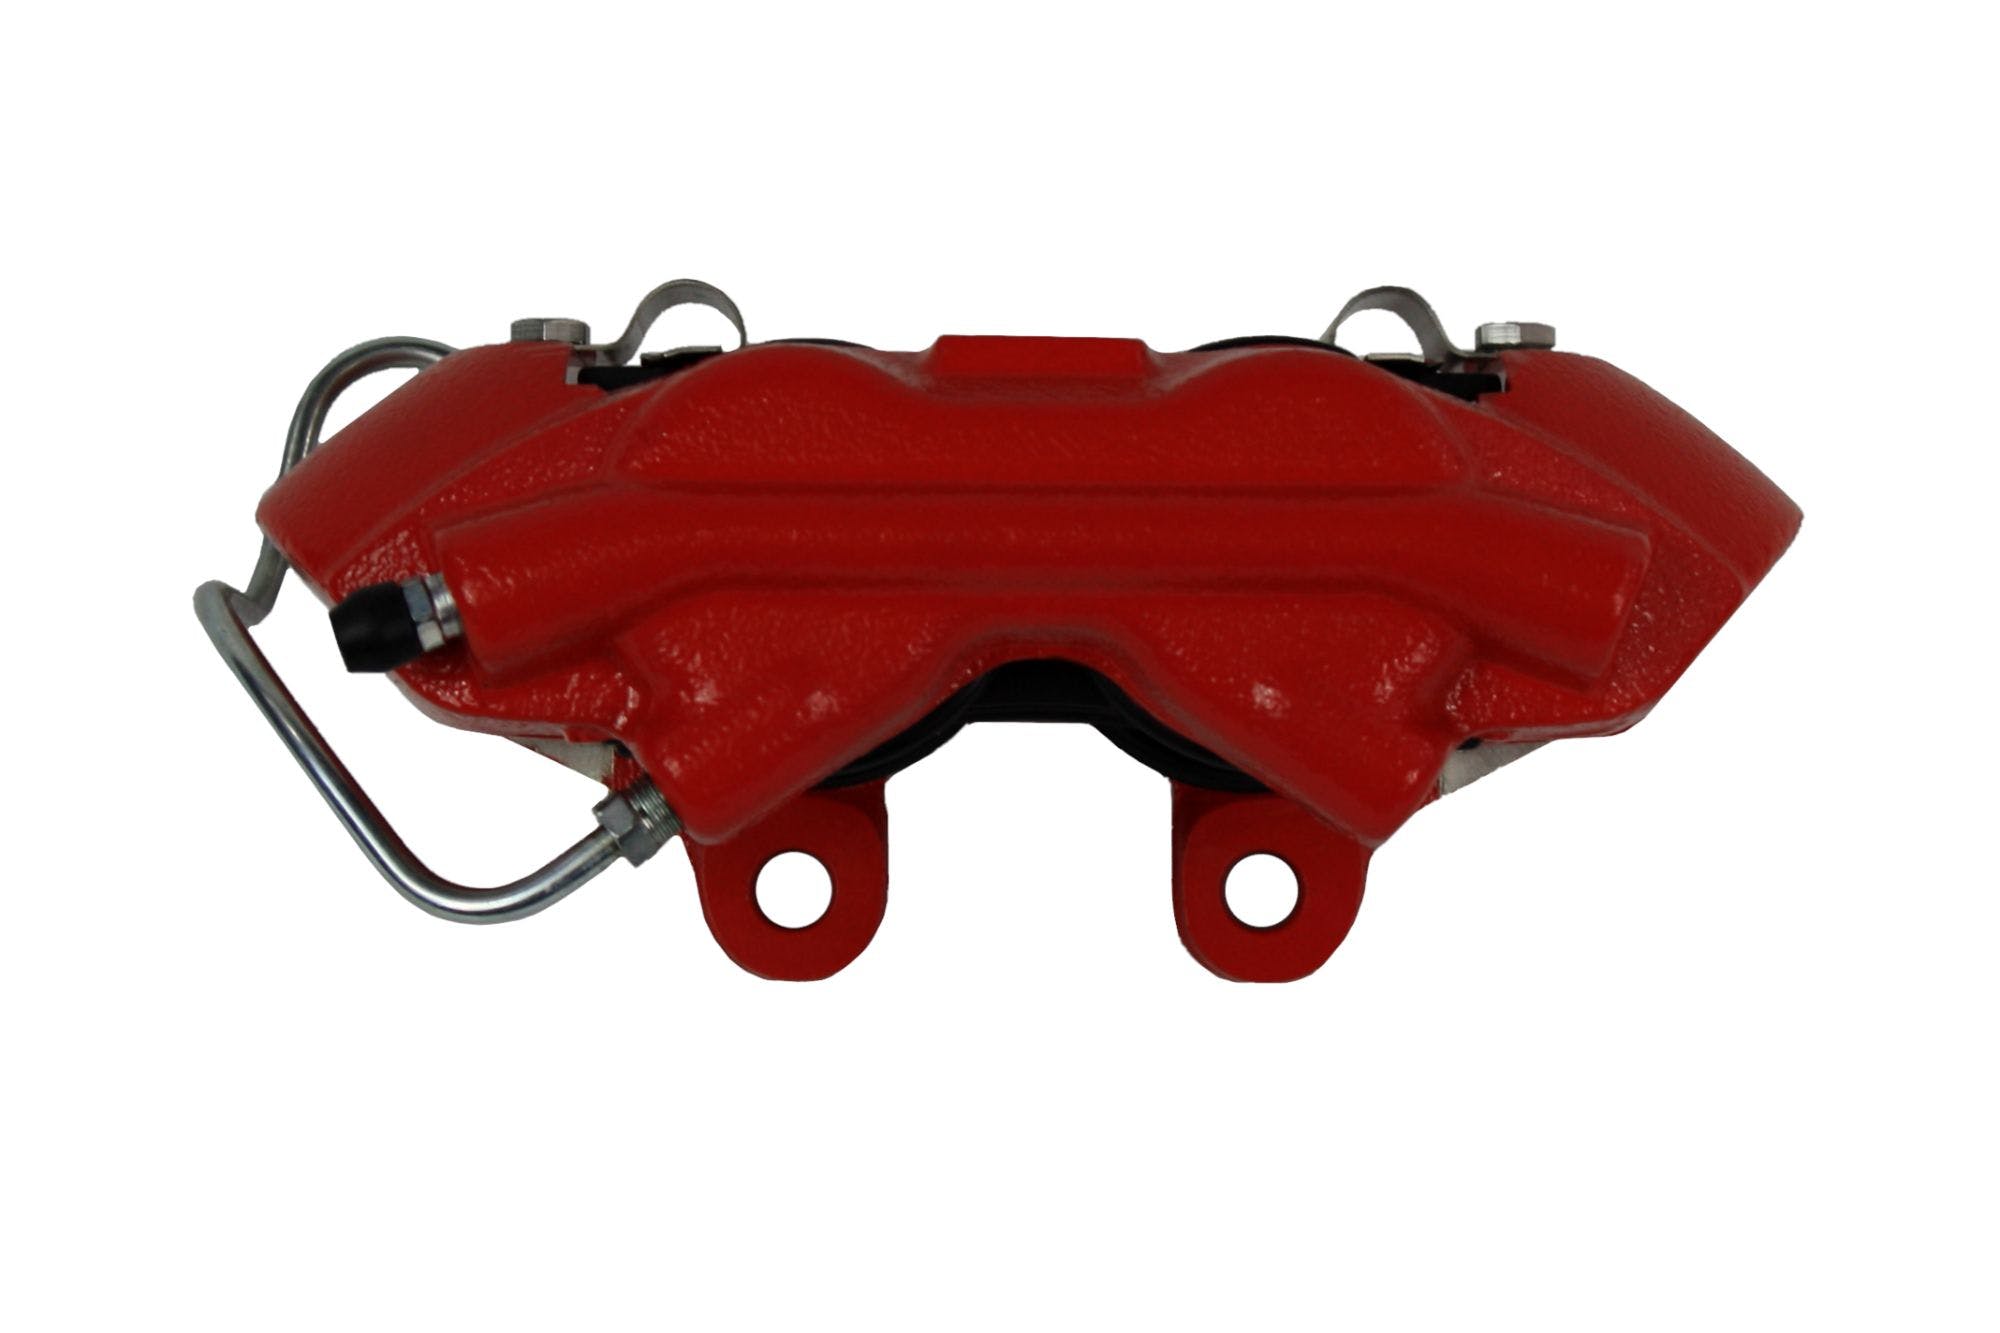 LEED Brakes RFC0025SMX Ford Full Size Manual Disc Conversion Kit, MaxGrip XDS, Spindle Mount-Red Powder